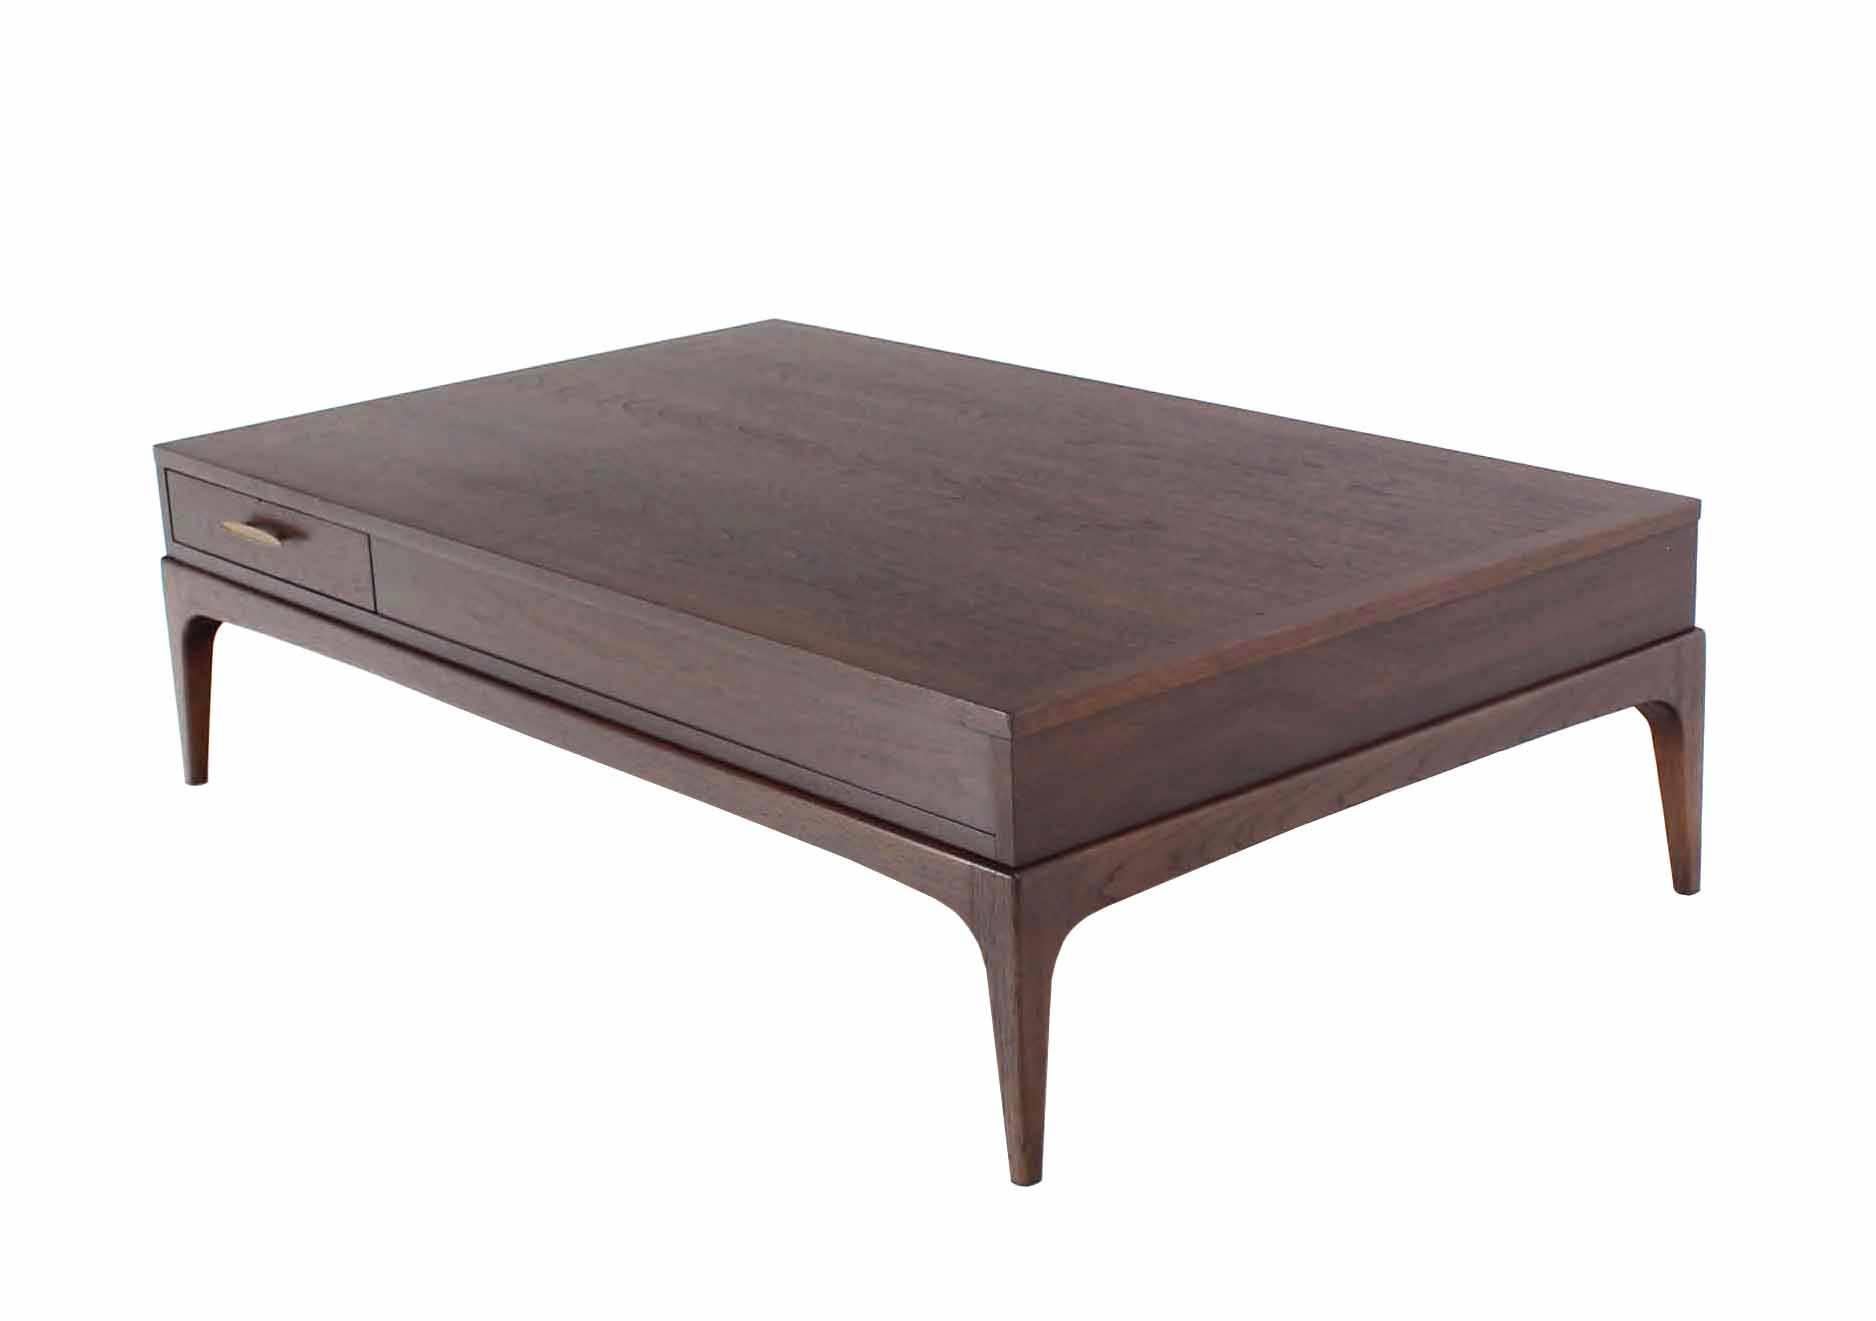 Large Rectangle One-Drawer Storage Bin Mid Century Walnut Coffee Table MINT For Sale 1